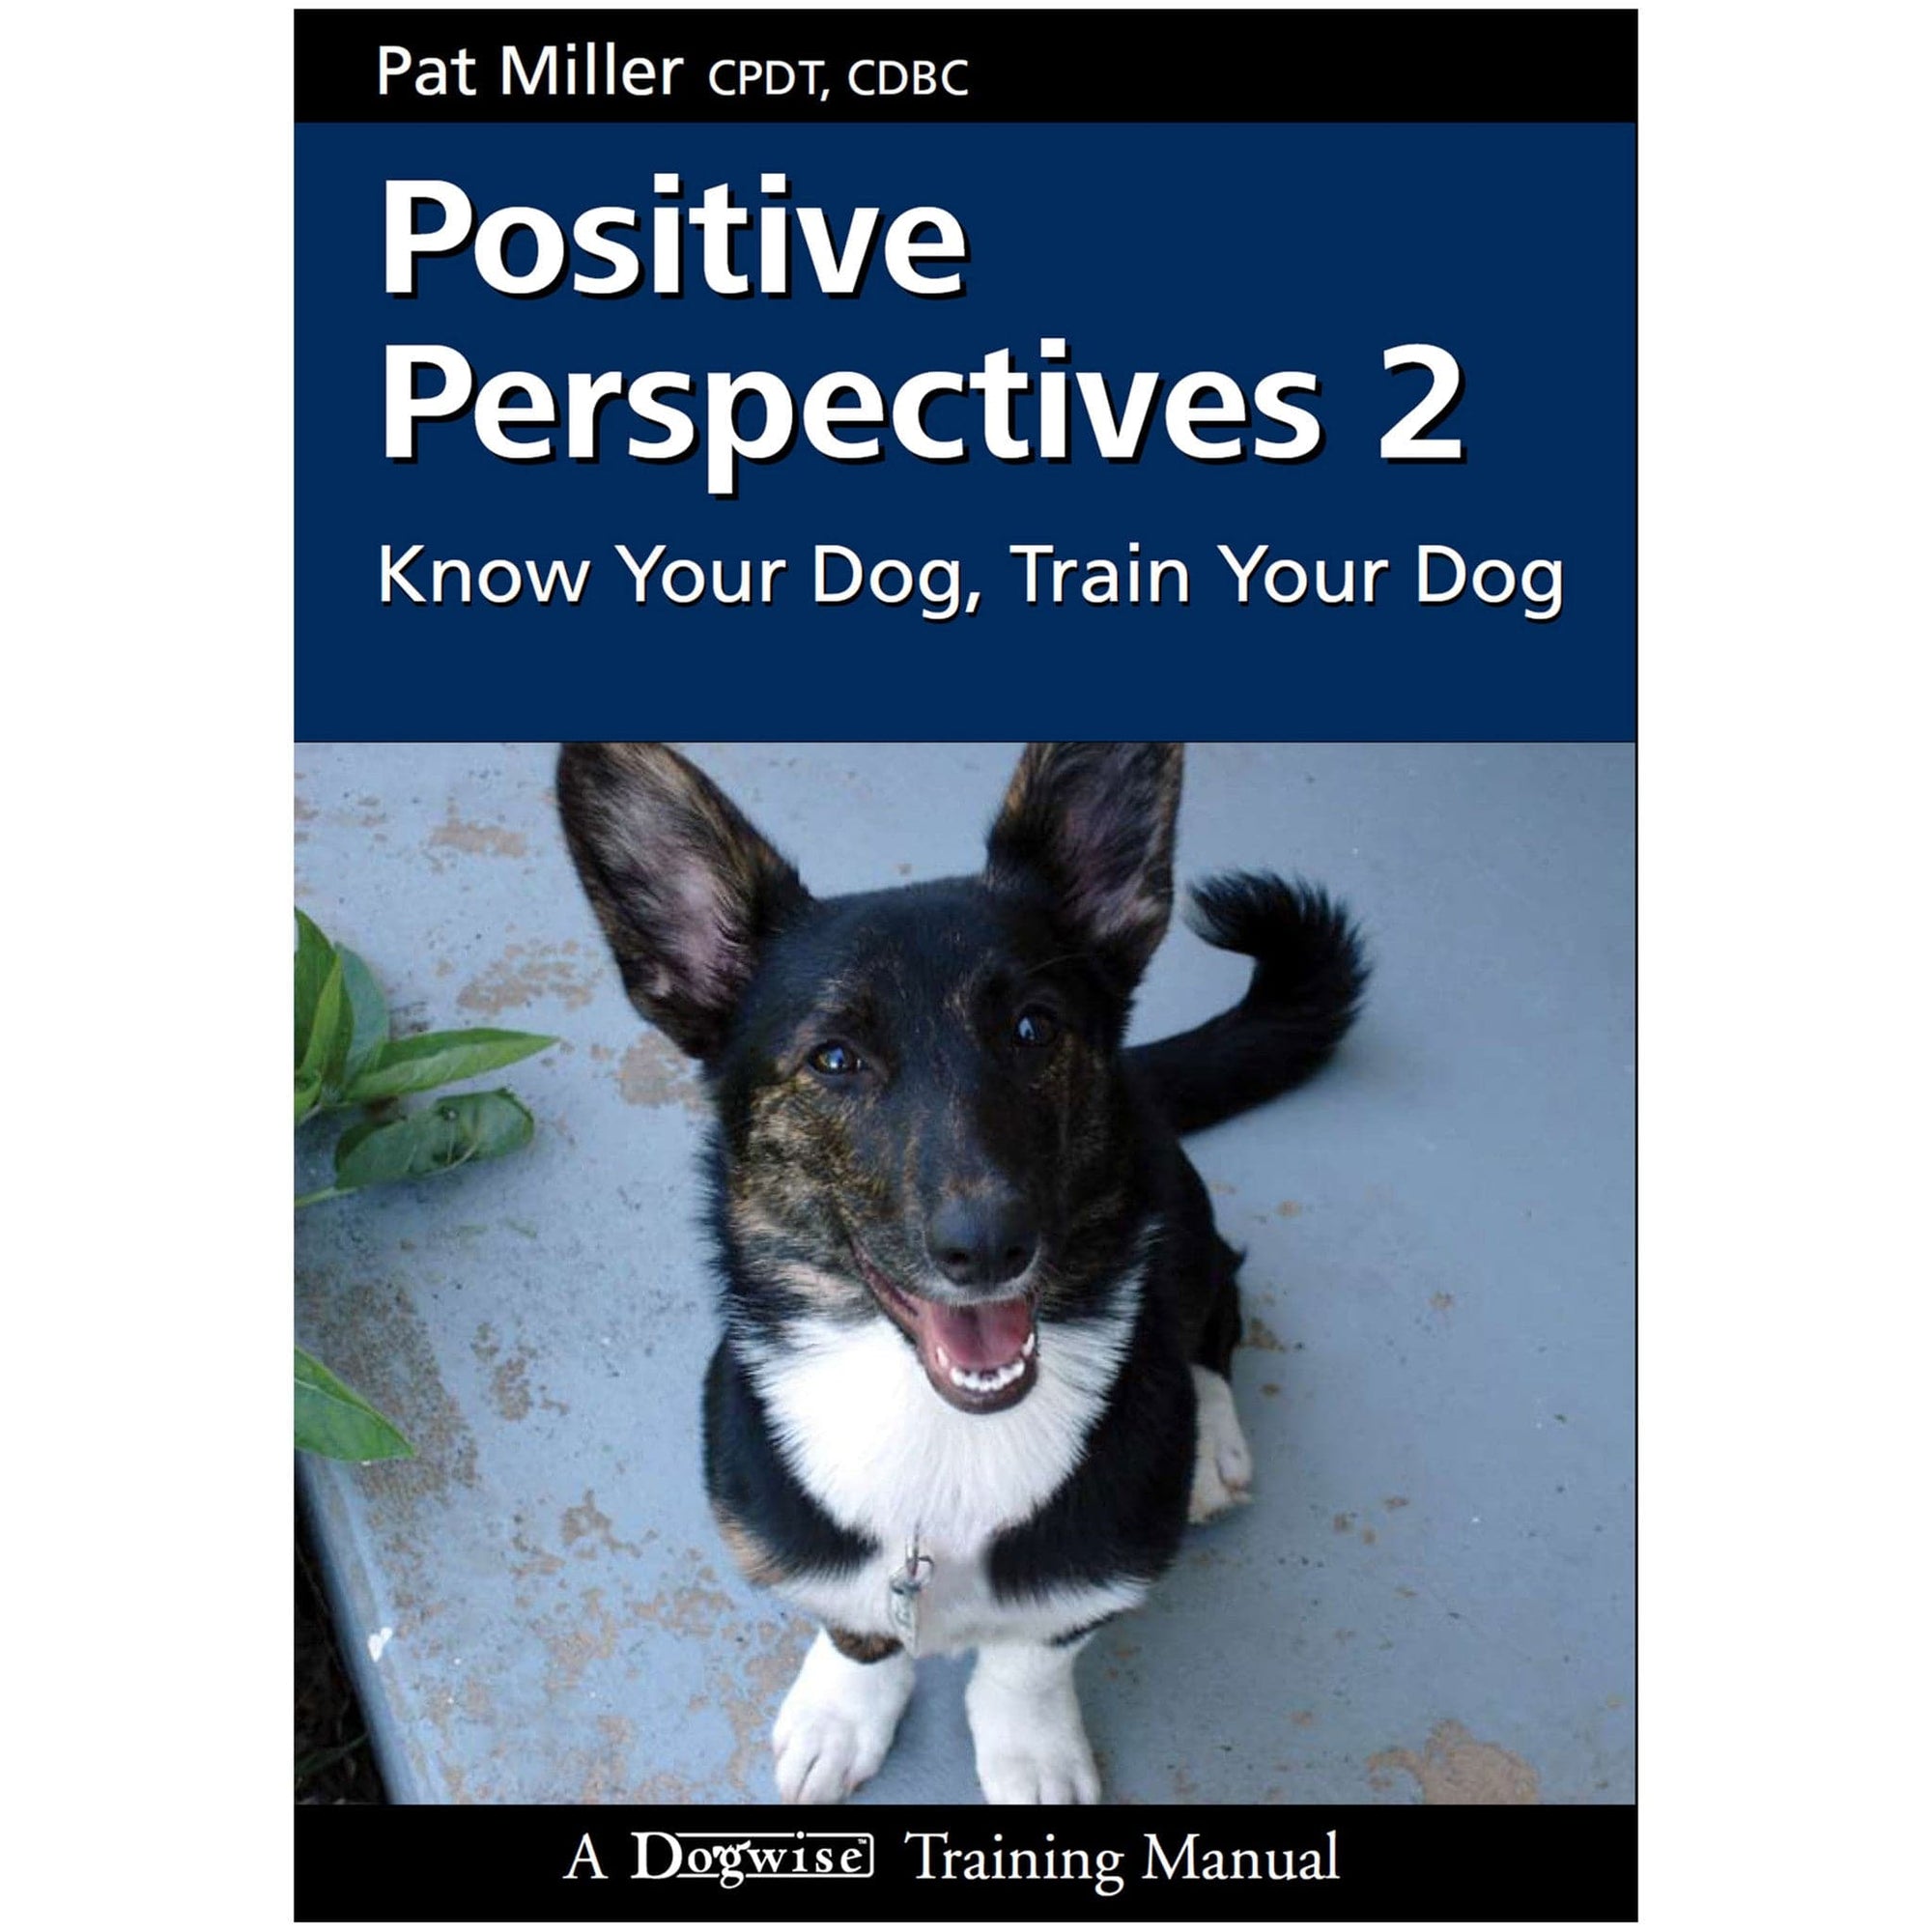 Positive Perspectives 2: Know Your Dog, Train Your Dog   e-book